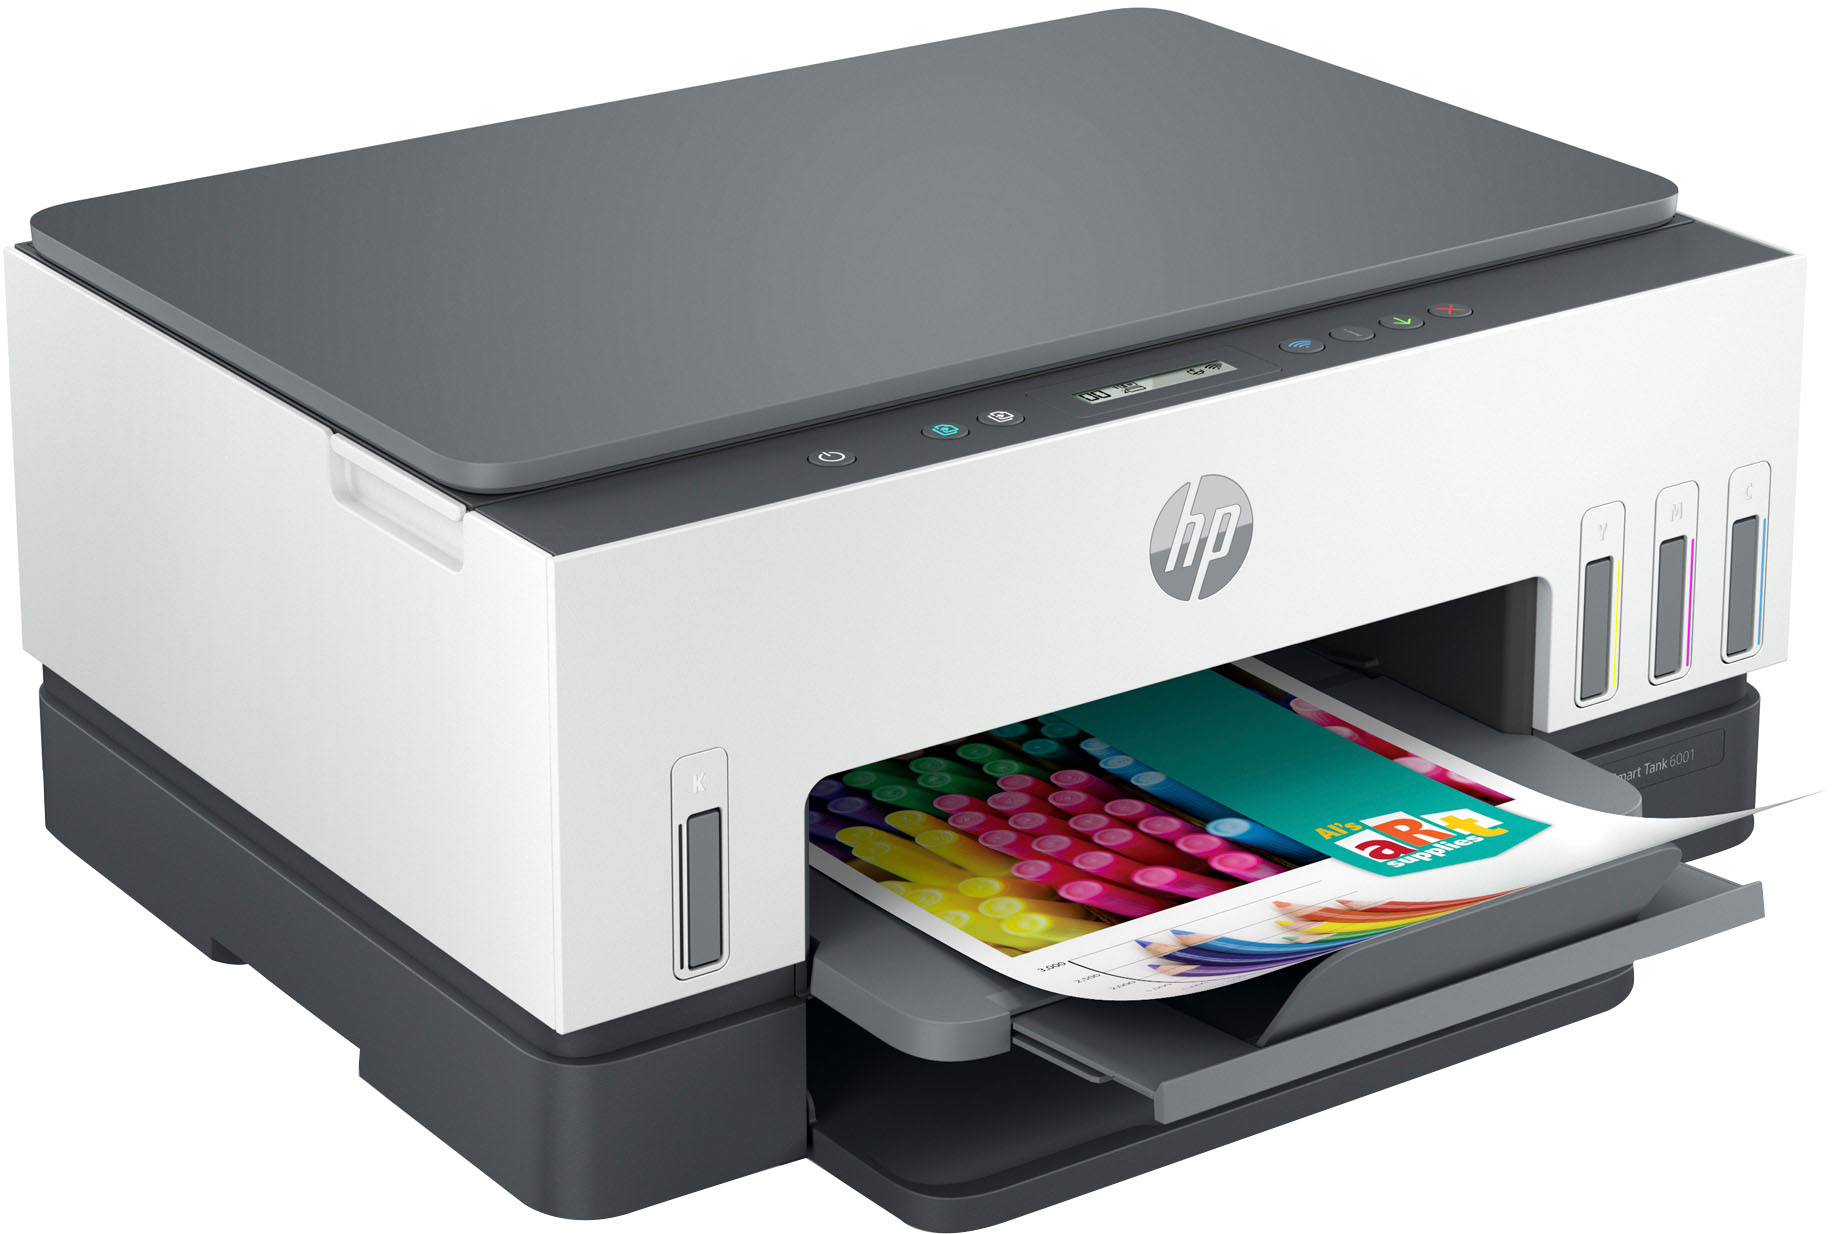 HP announces the new line-up of Smart Tank All-in-One printers